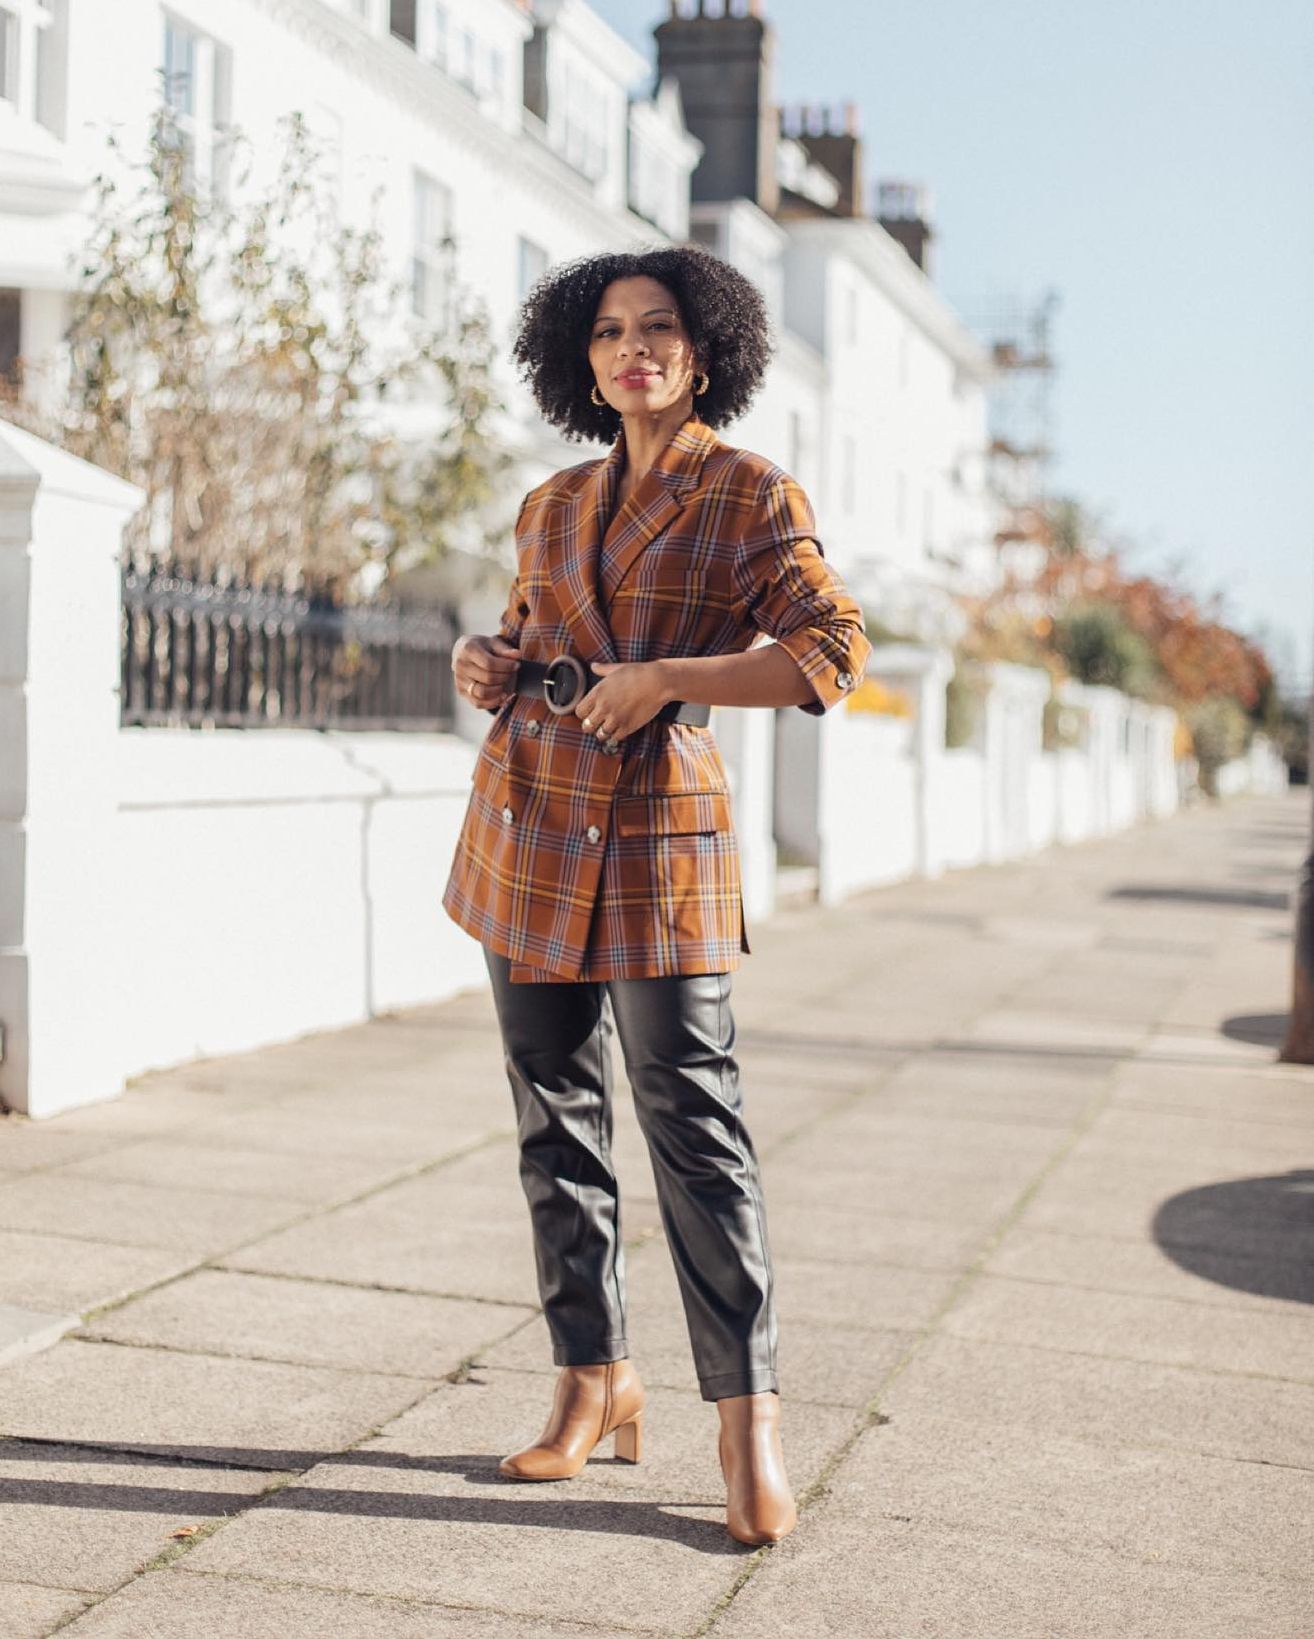 Plaid Is Back: Incorporating Fall Prints Into Your Petite Office Looks